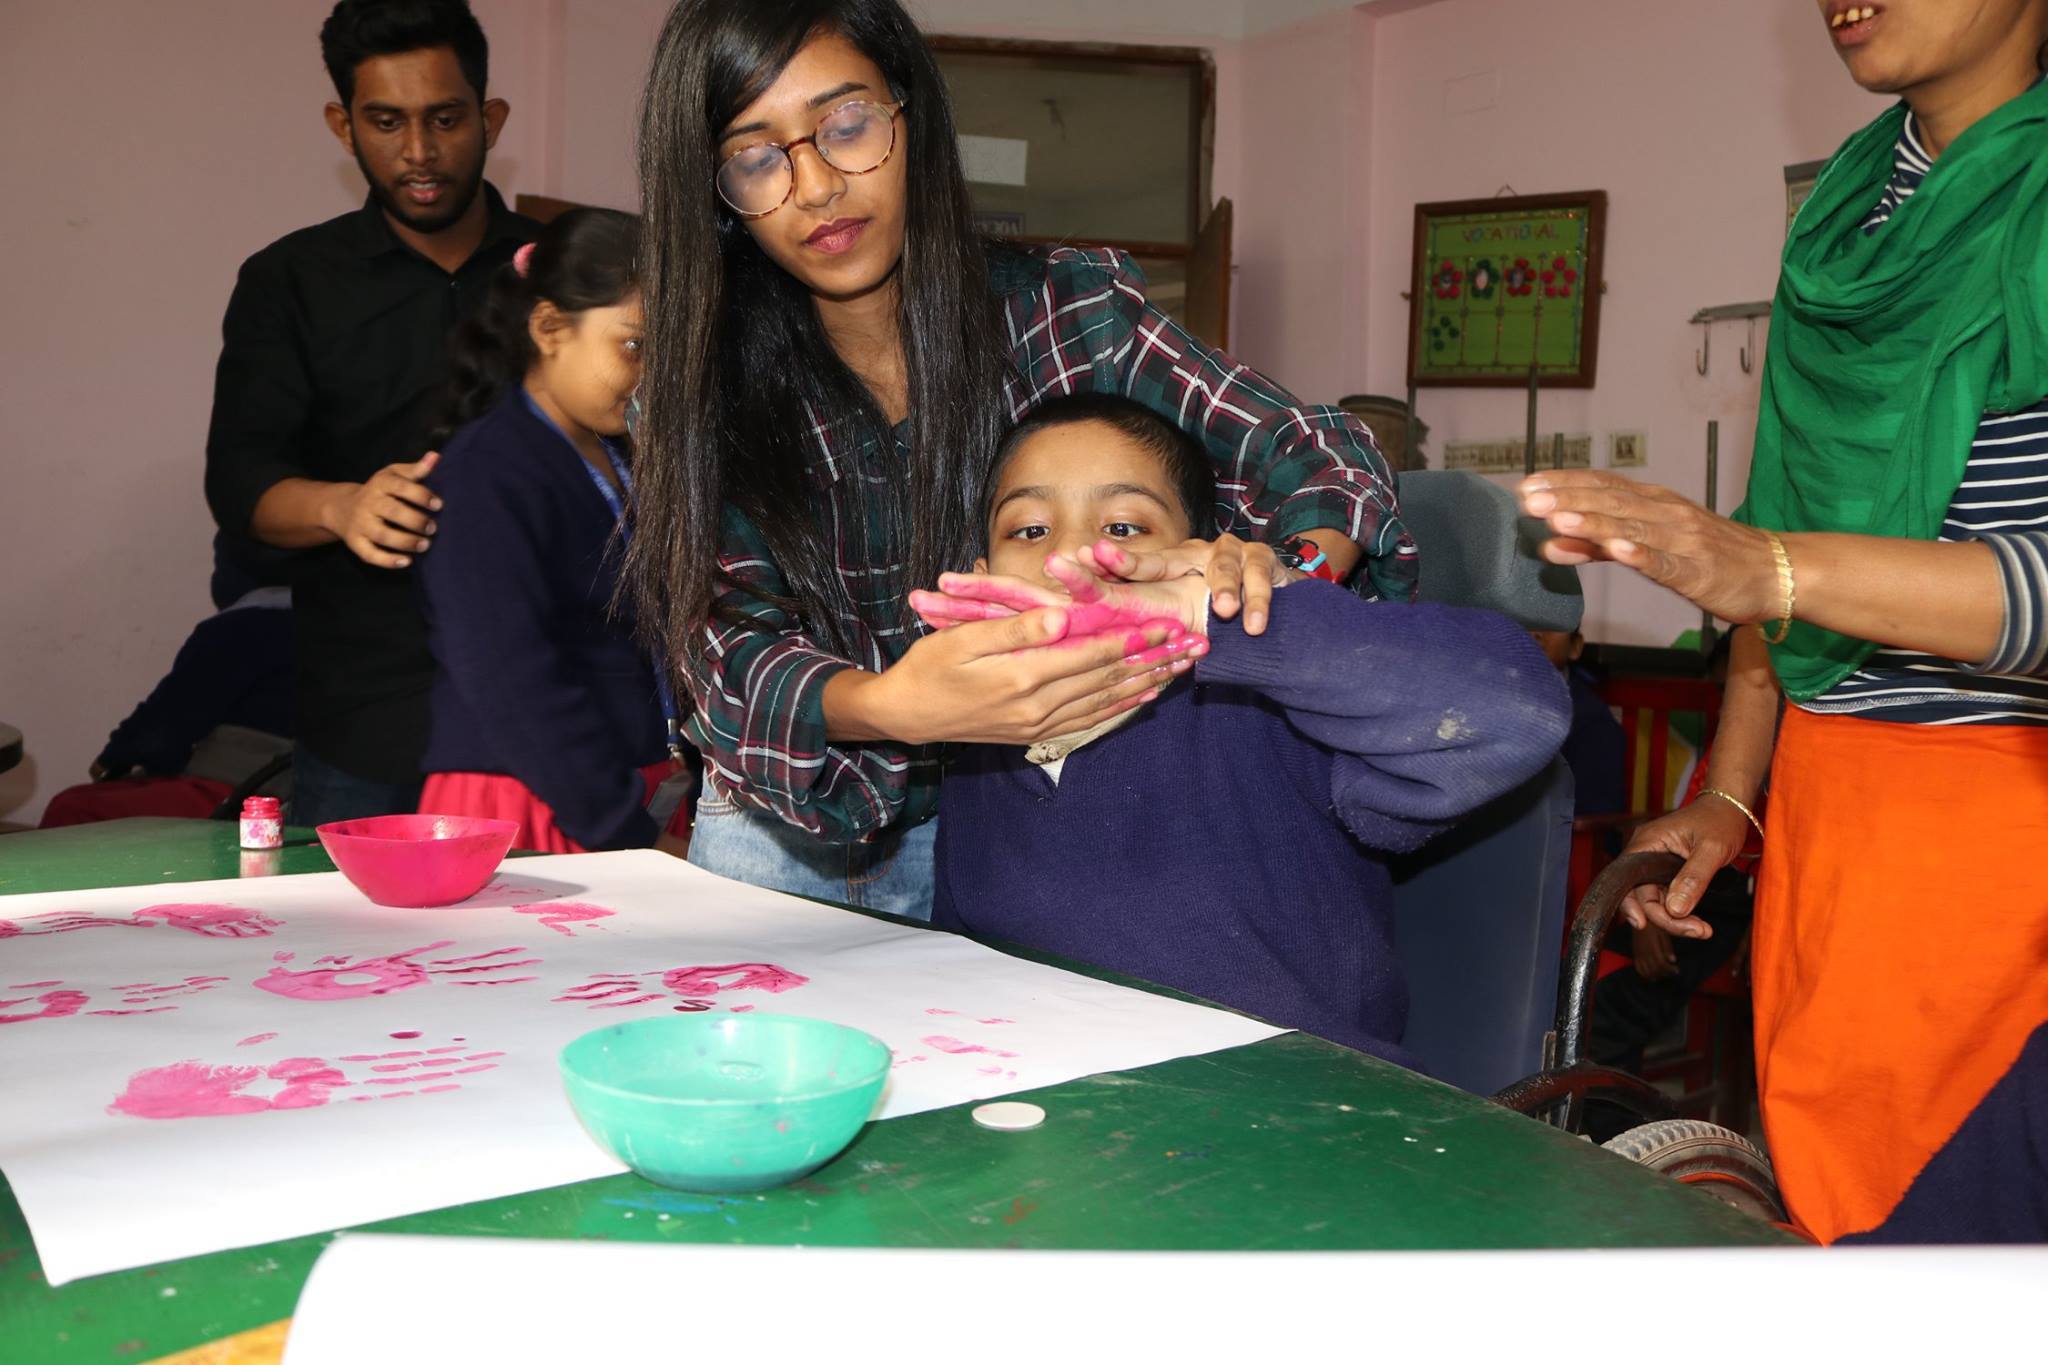 Shomy leading WASH activities with young children